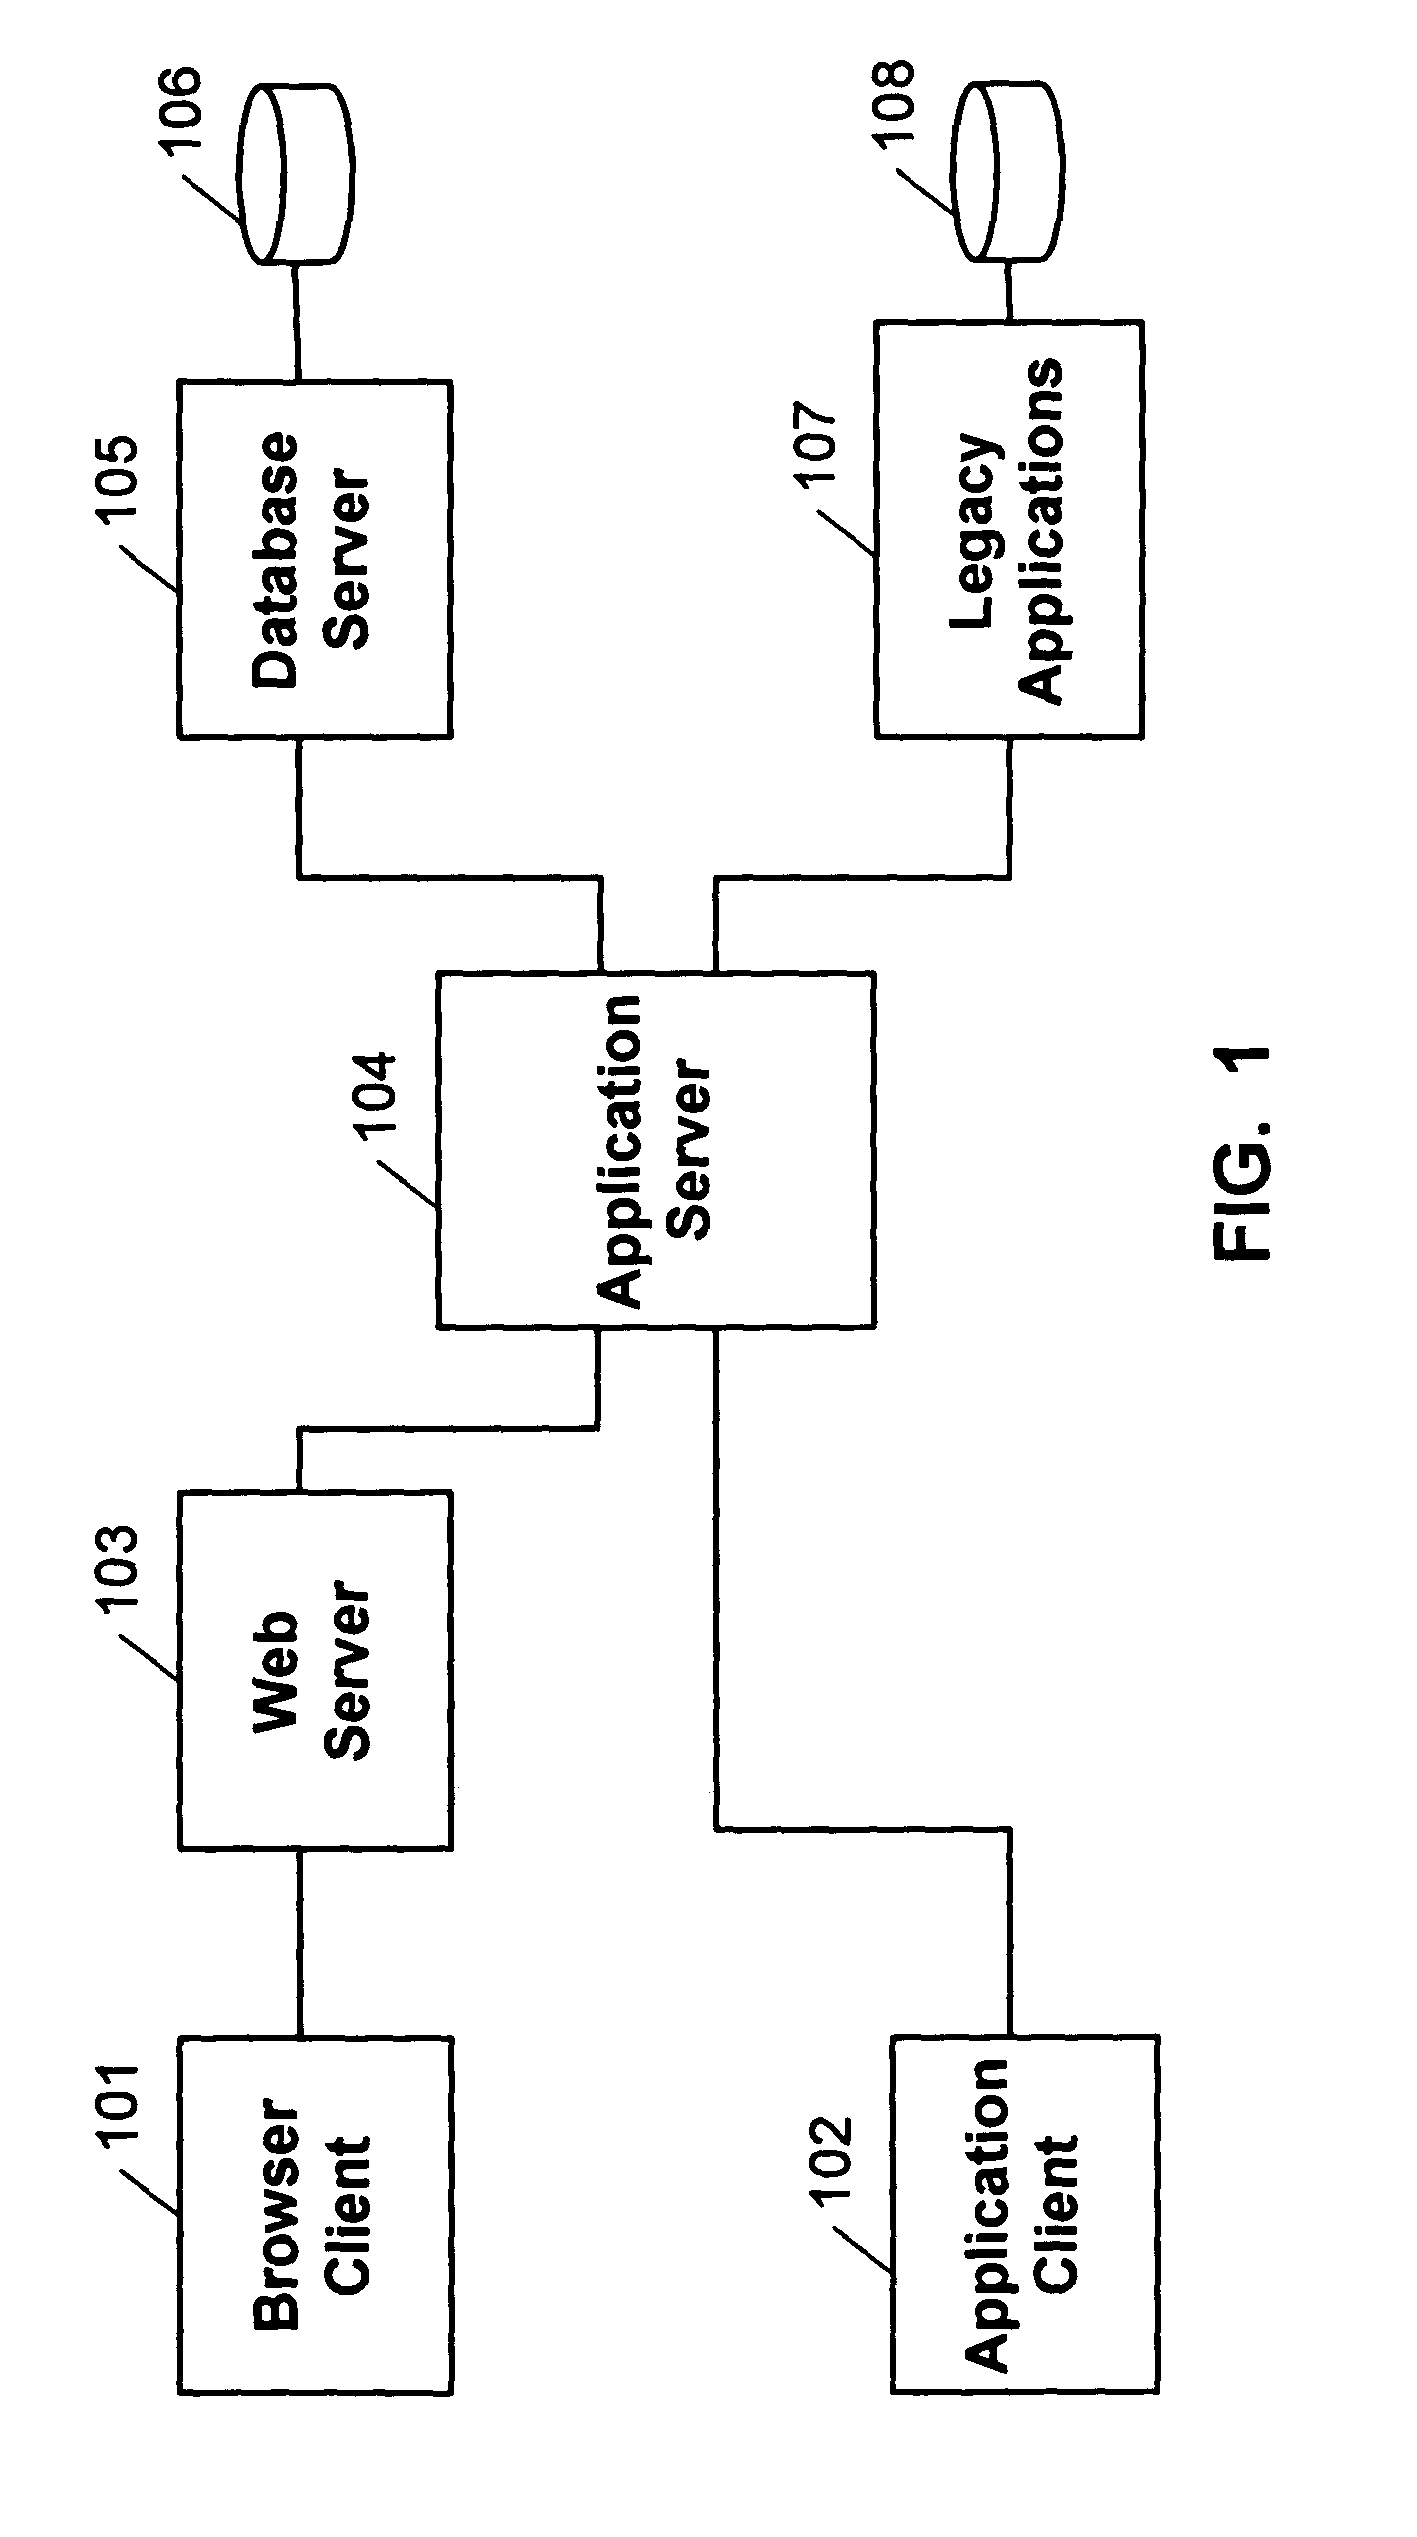 Method for tracing application execution path in a distributed data processing system